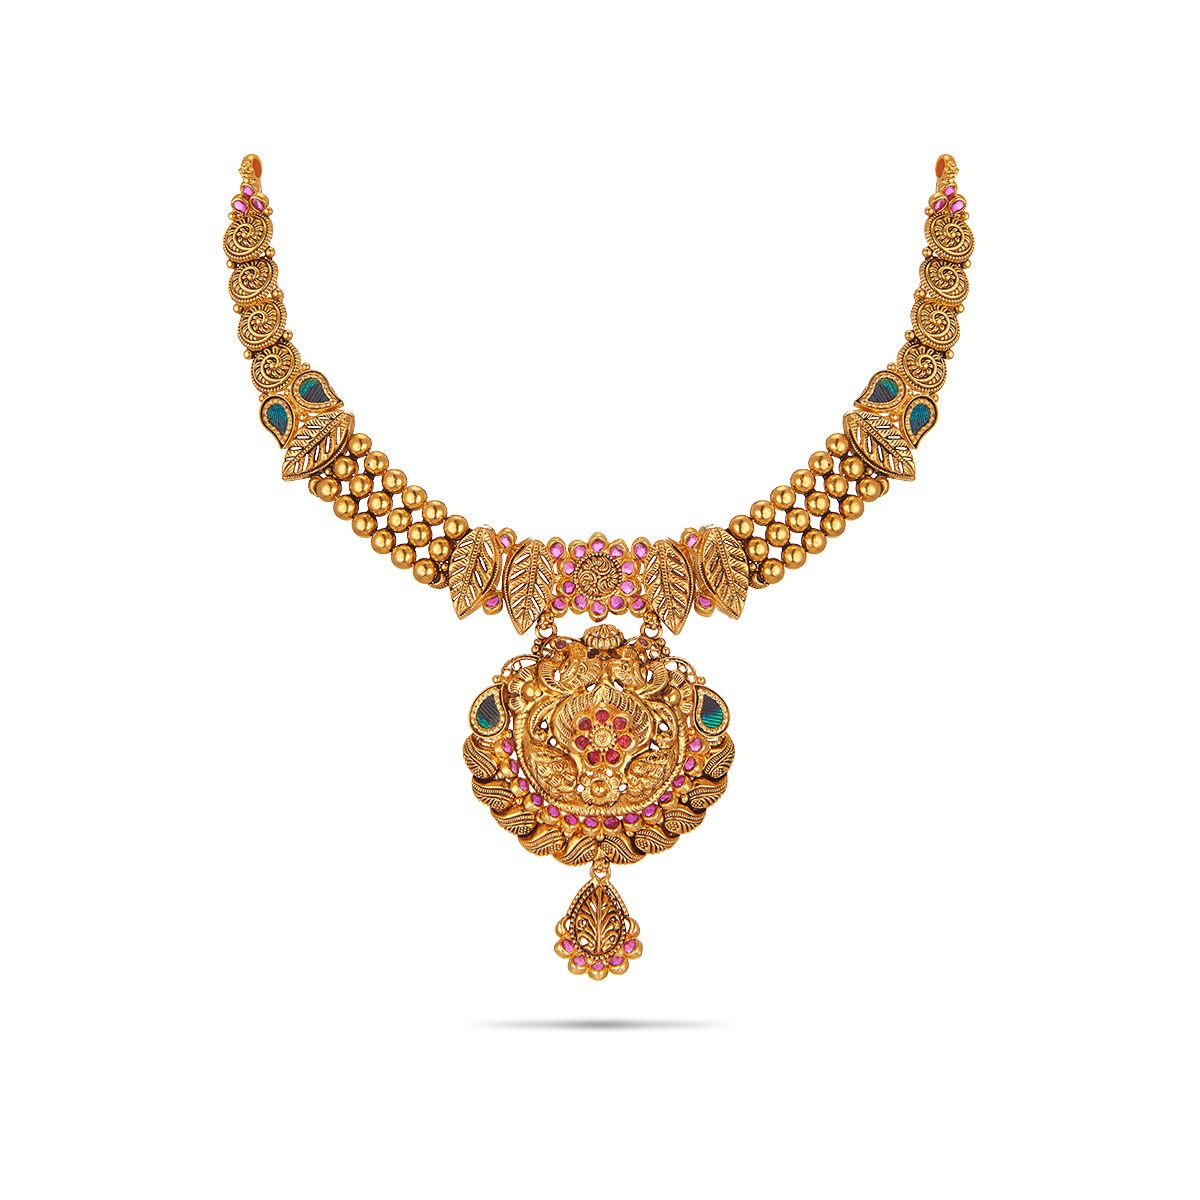 Astonishing Collection of Full 4K Gold Necklace Images: Over 999+ Pictures